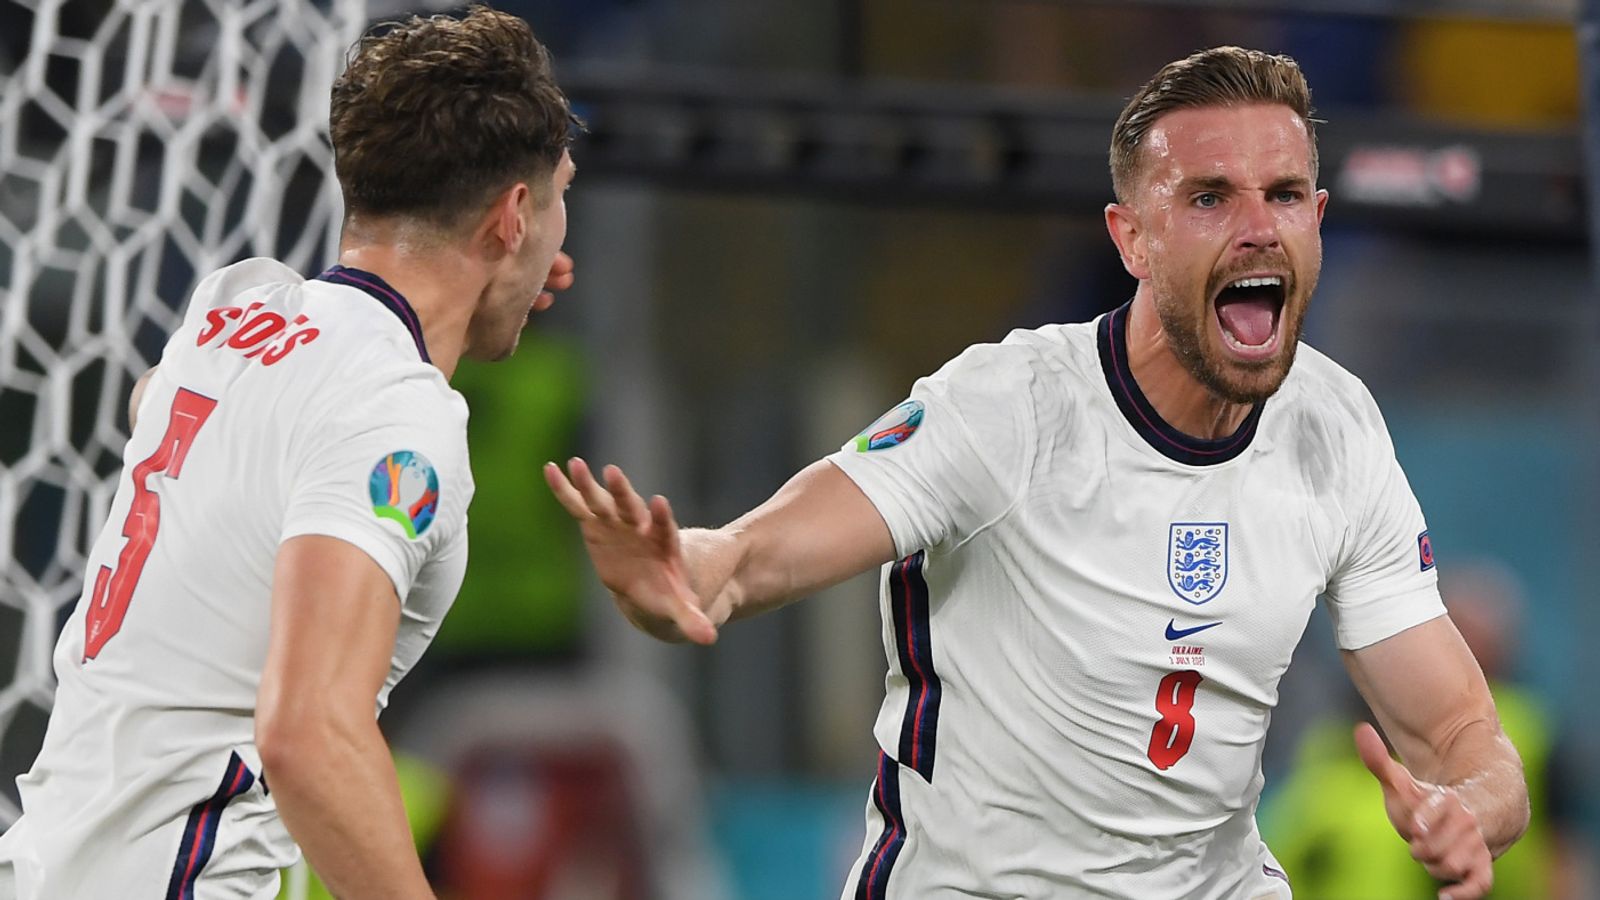 Euro 2020 hits and misses: England turn on the style to reach semi-finals